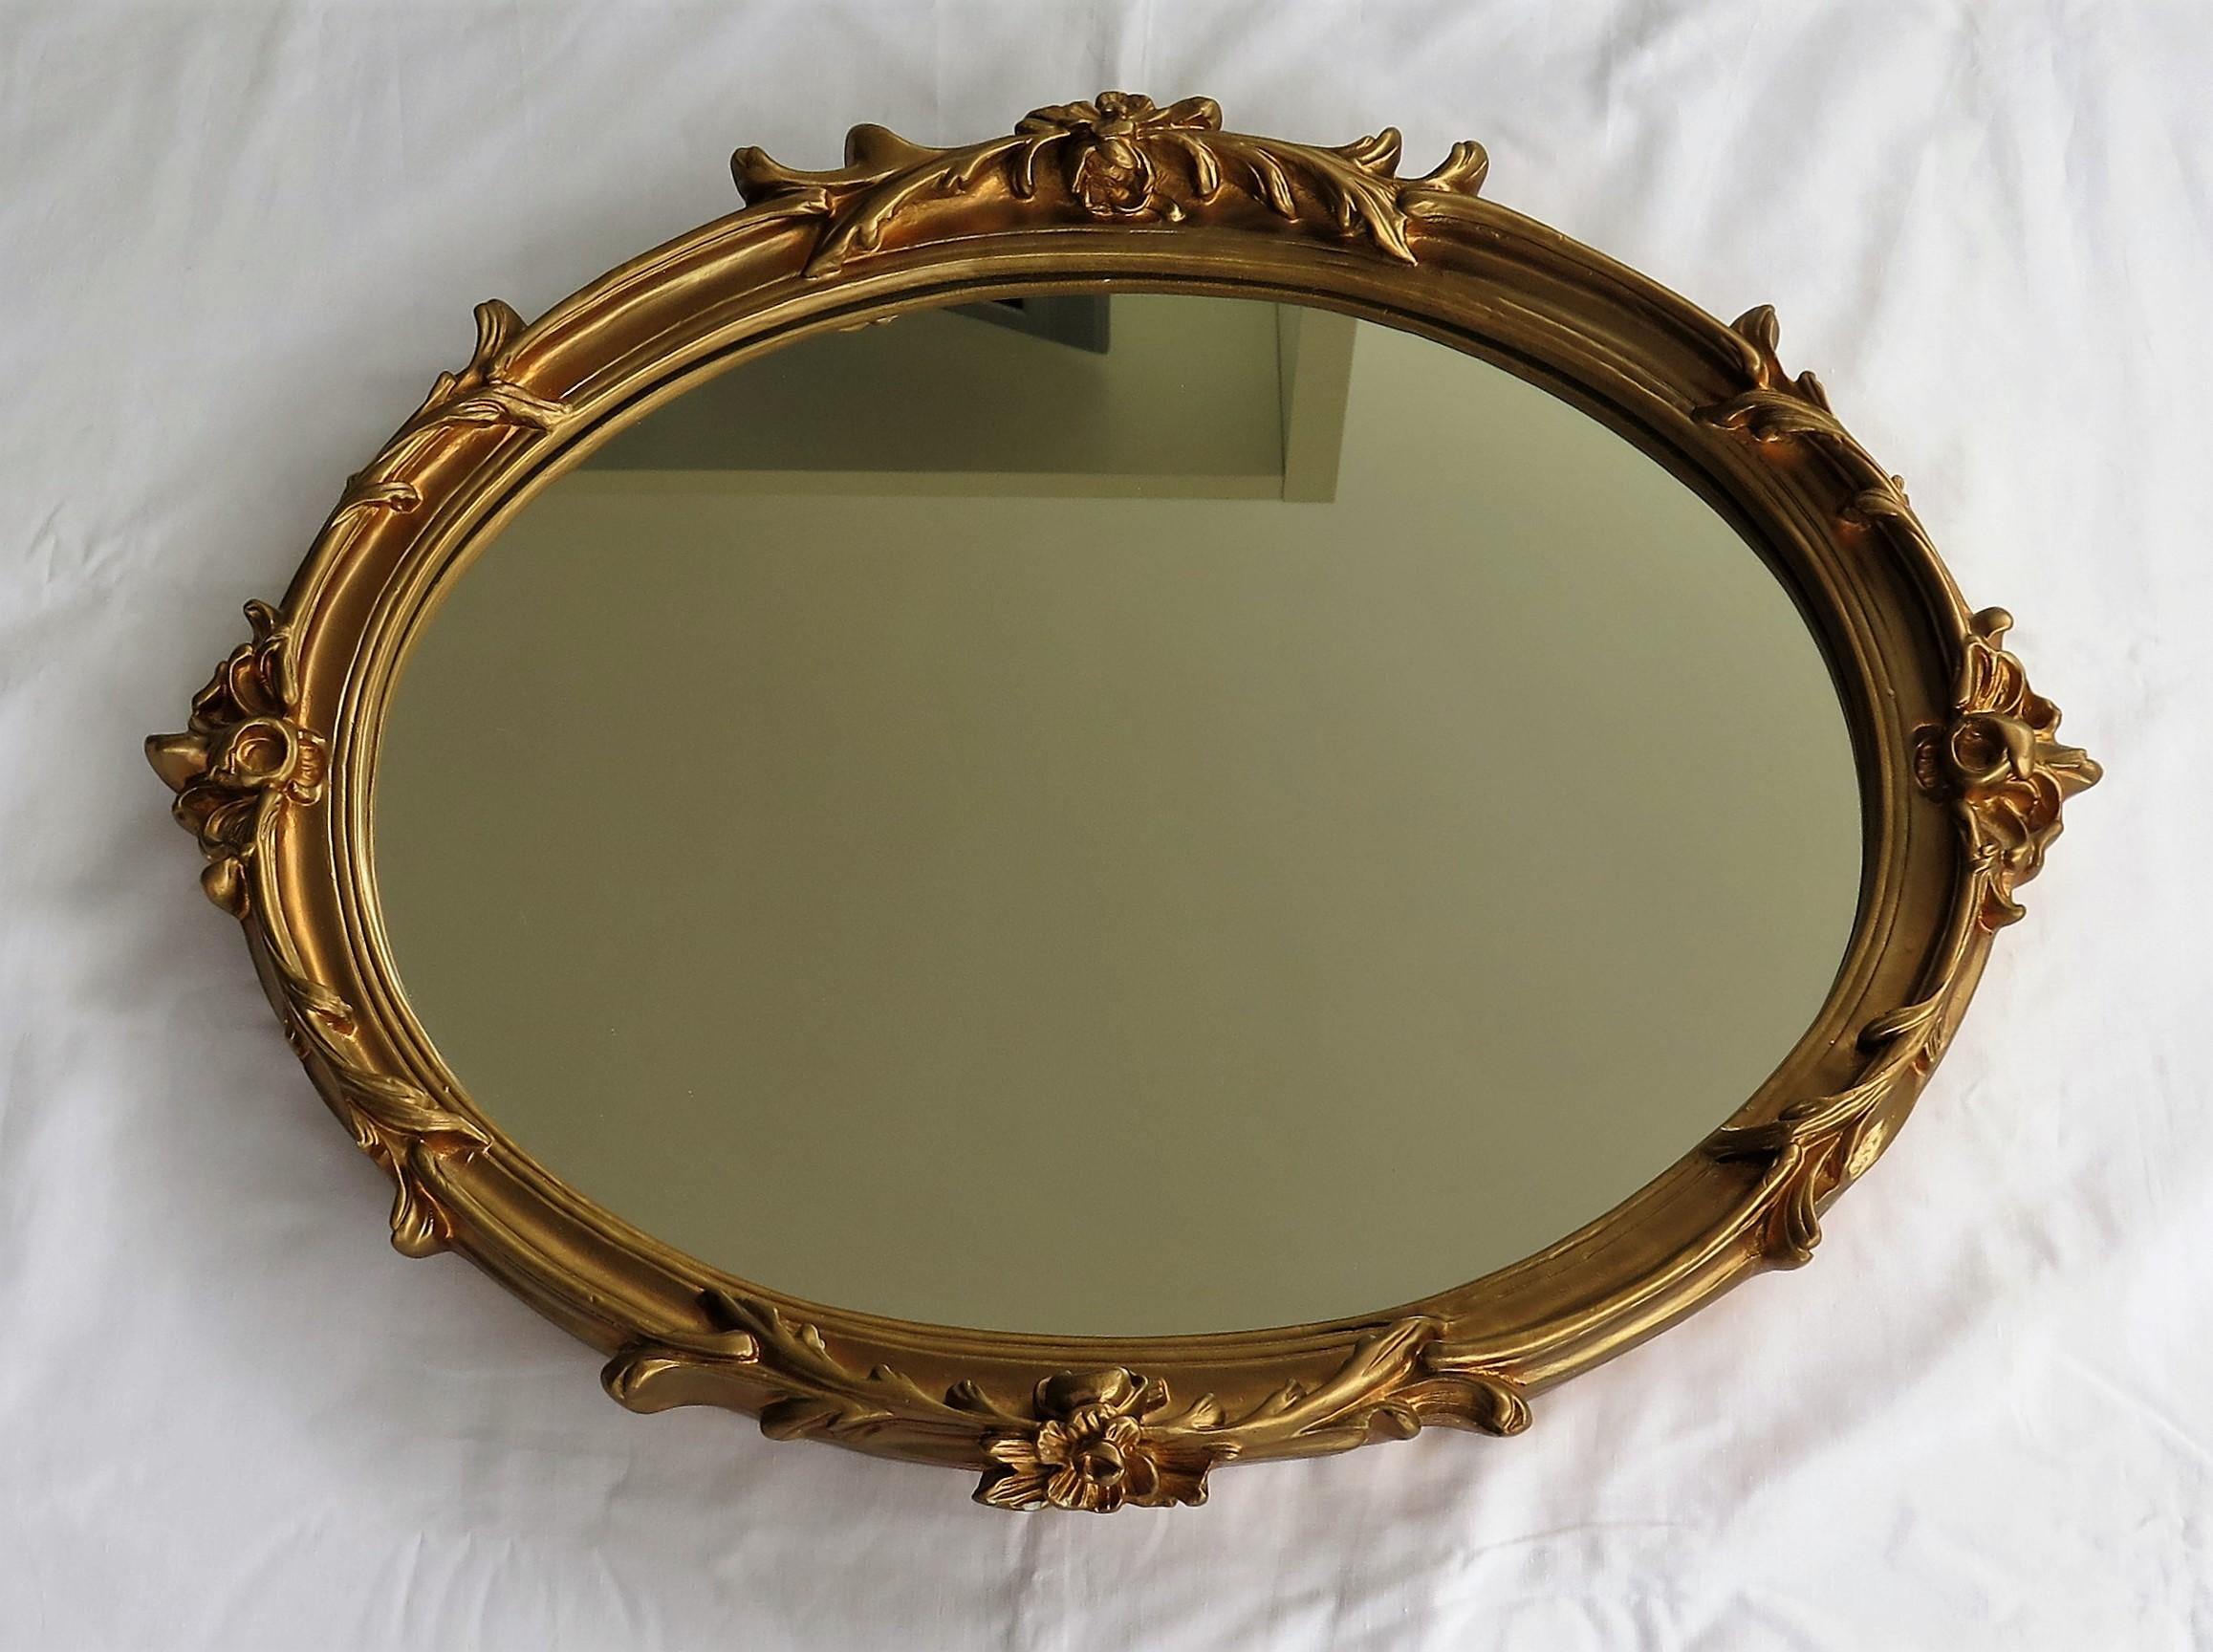 English Oval Wall Mirror with Rococo Gold Finish Frame of Gesso on Wood, circa 1930